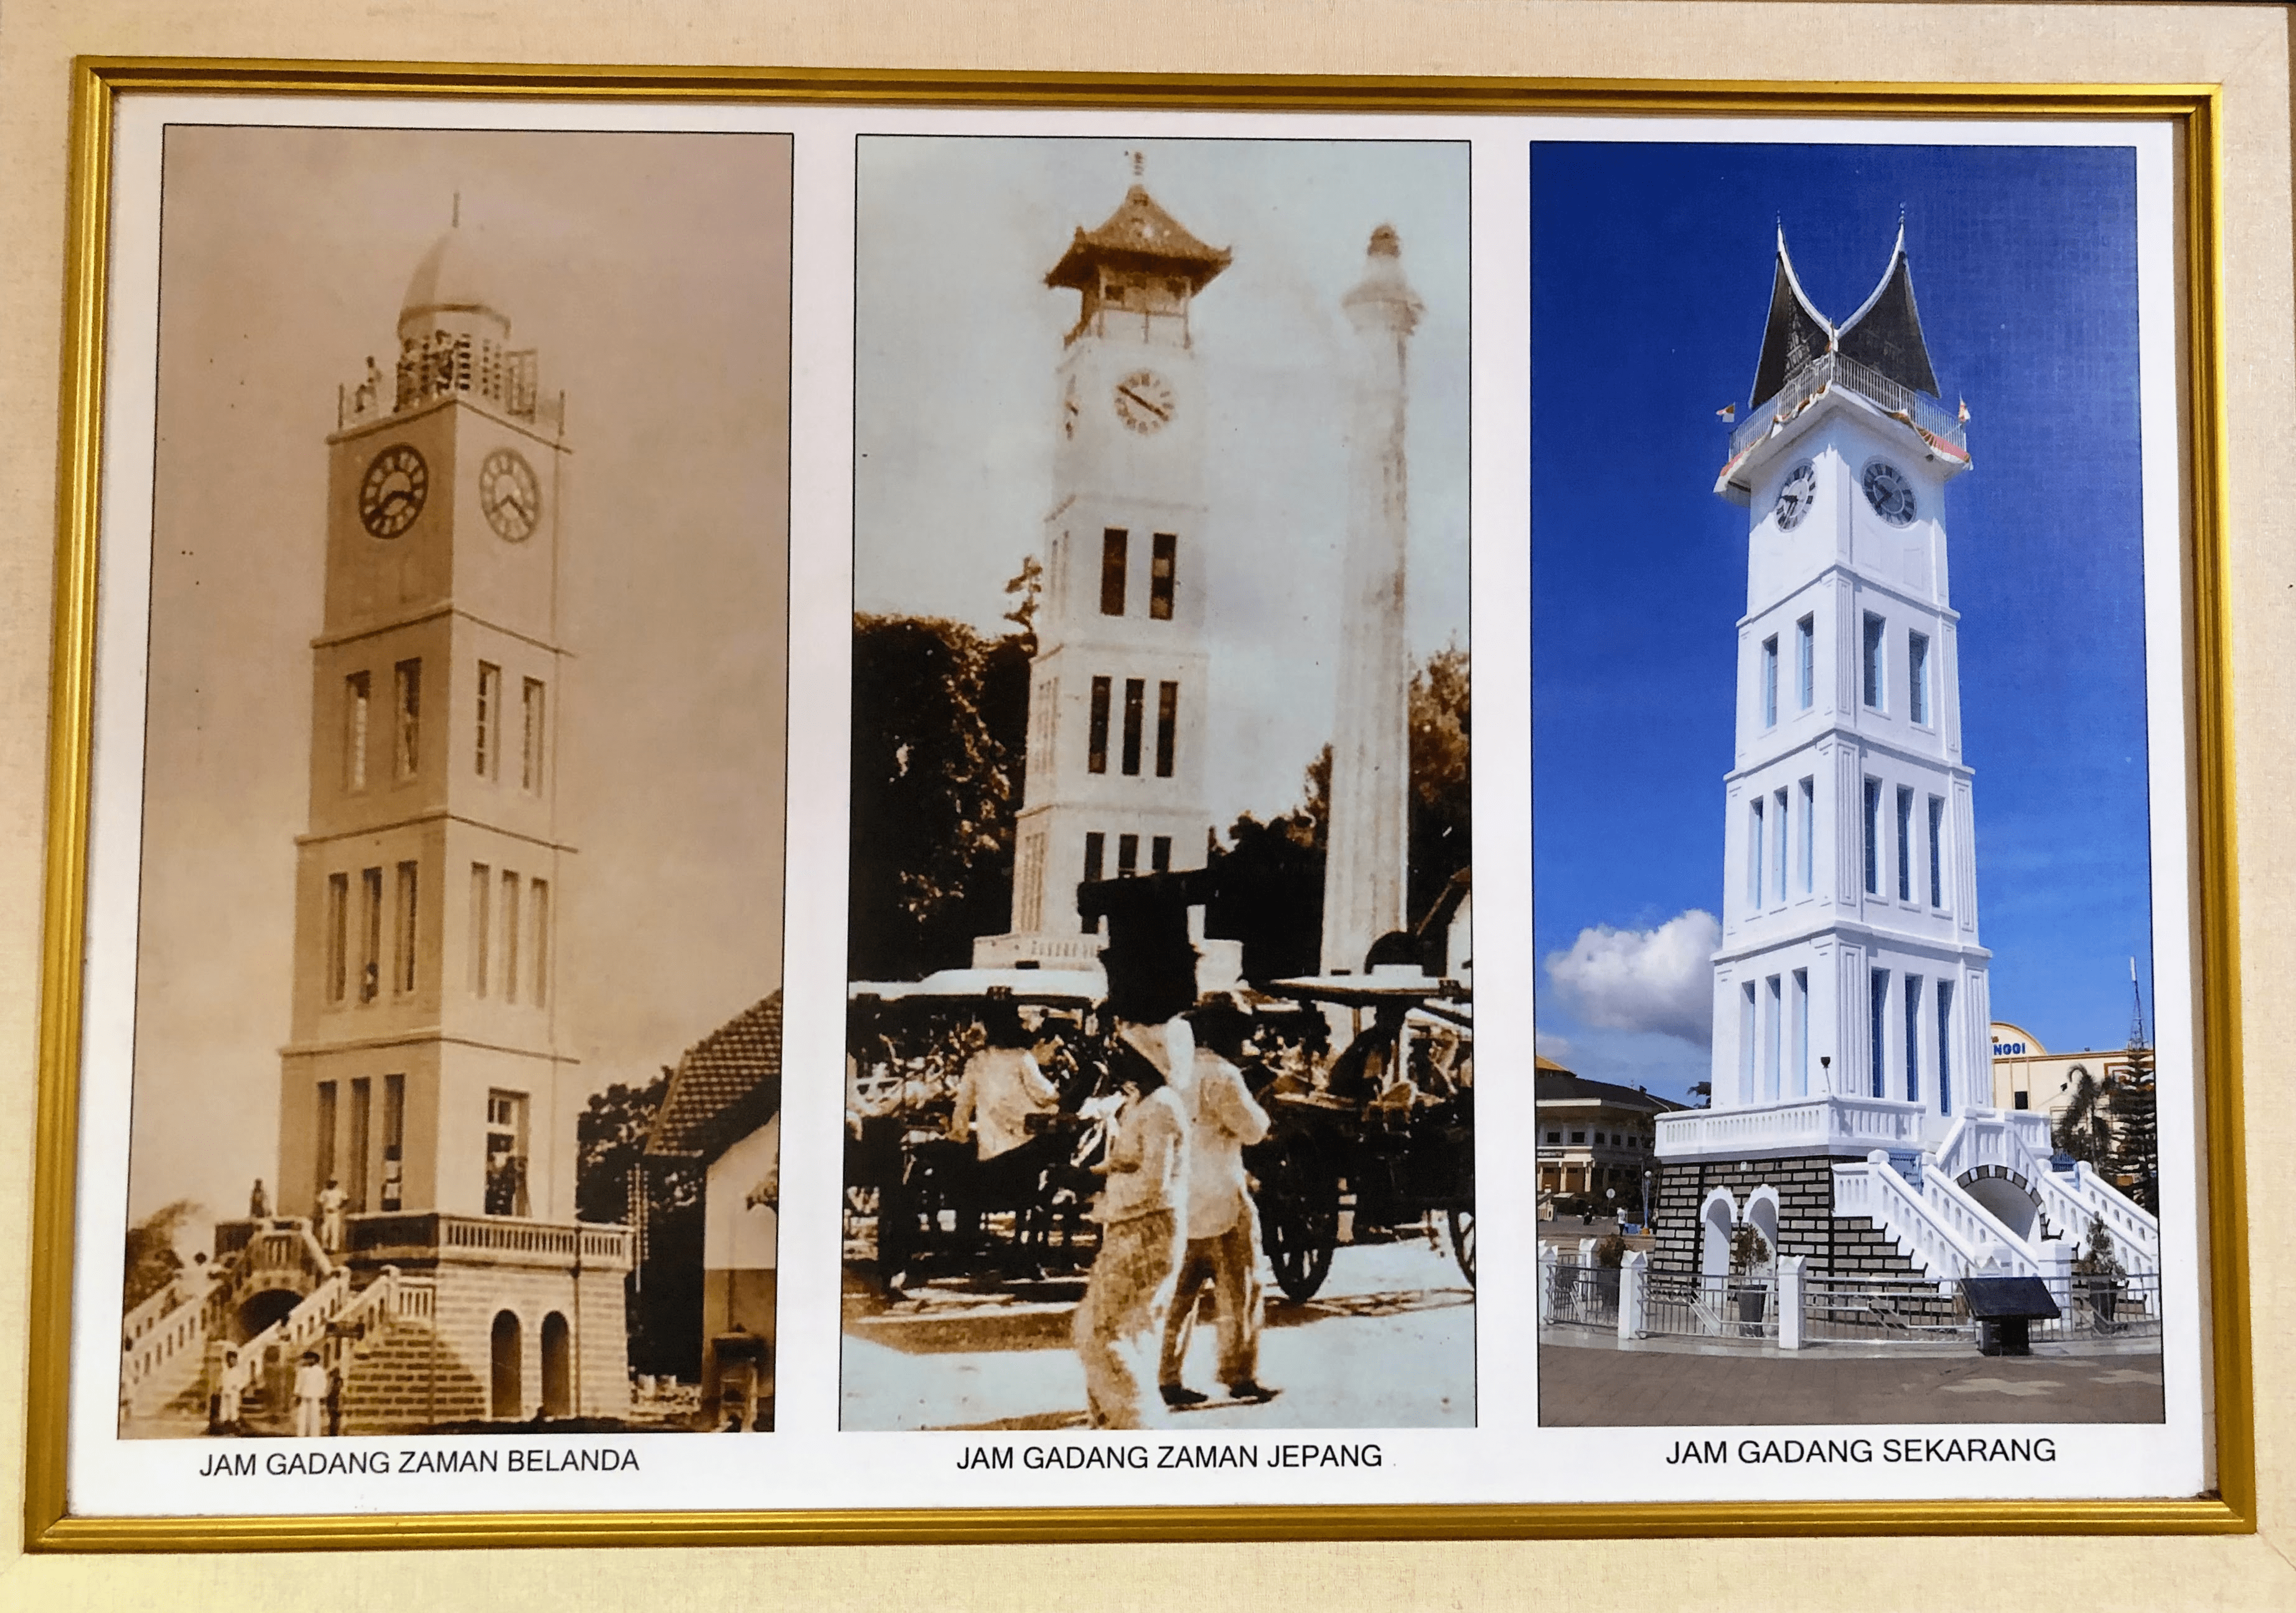 No image better captures the stages and shallowness of colonial rule than this panel of photographs of the Jam Gadang. Note the change in the tower's top.